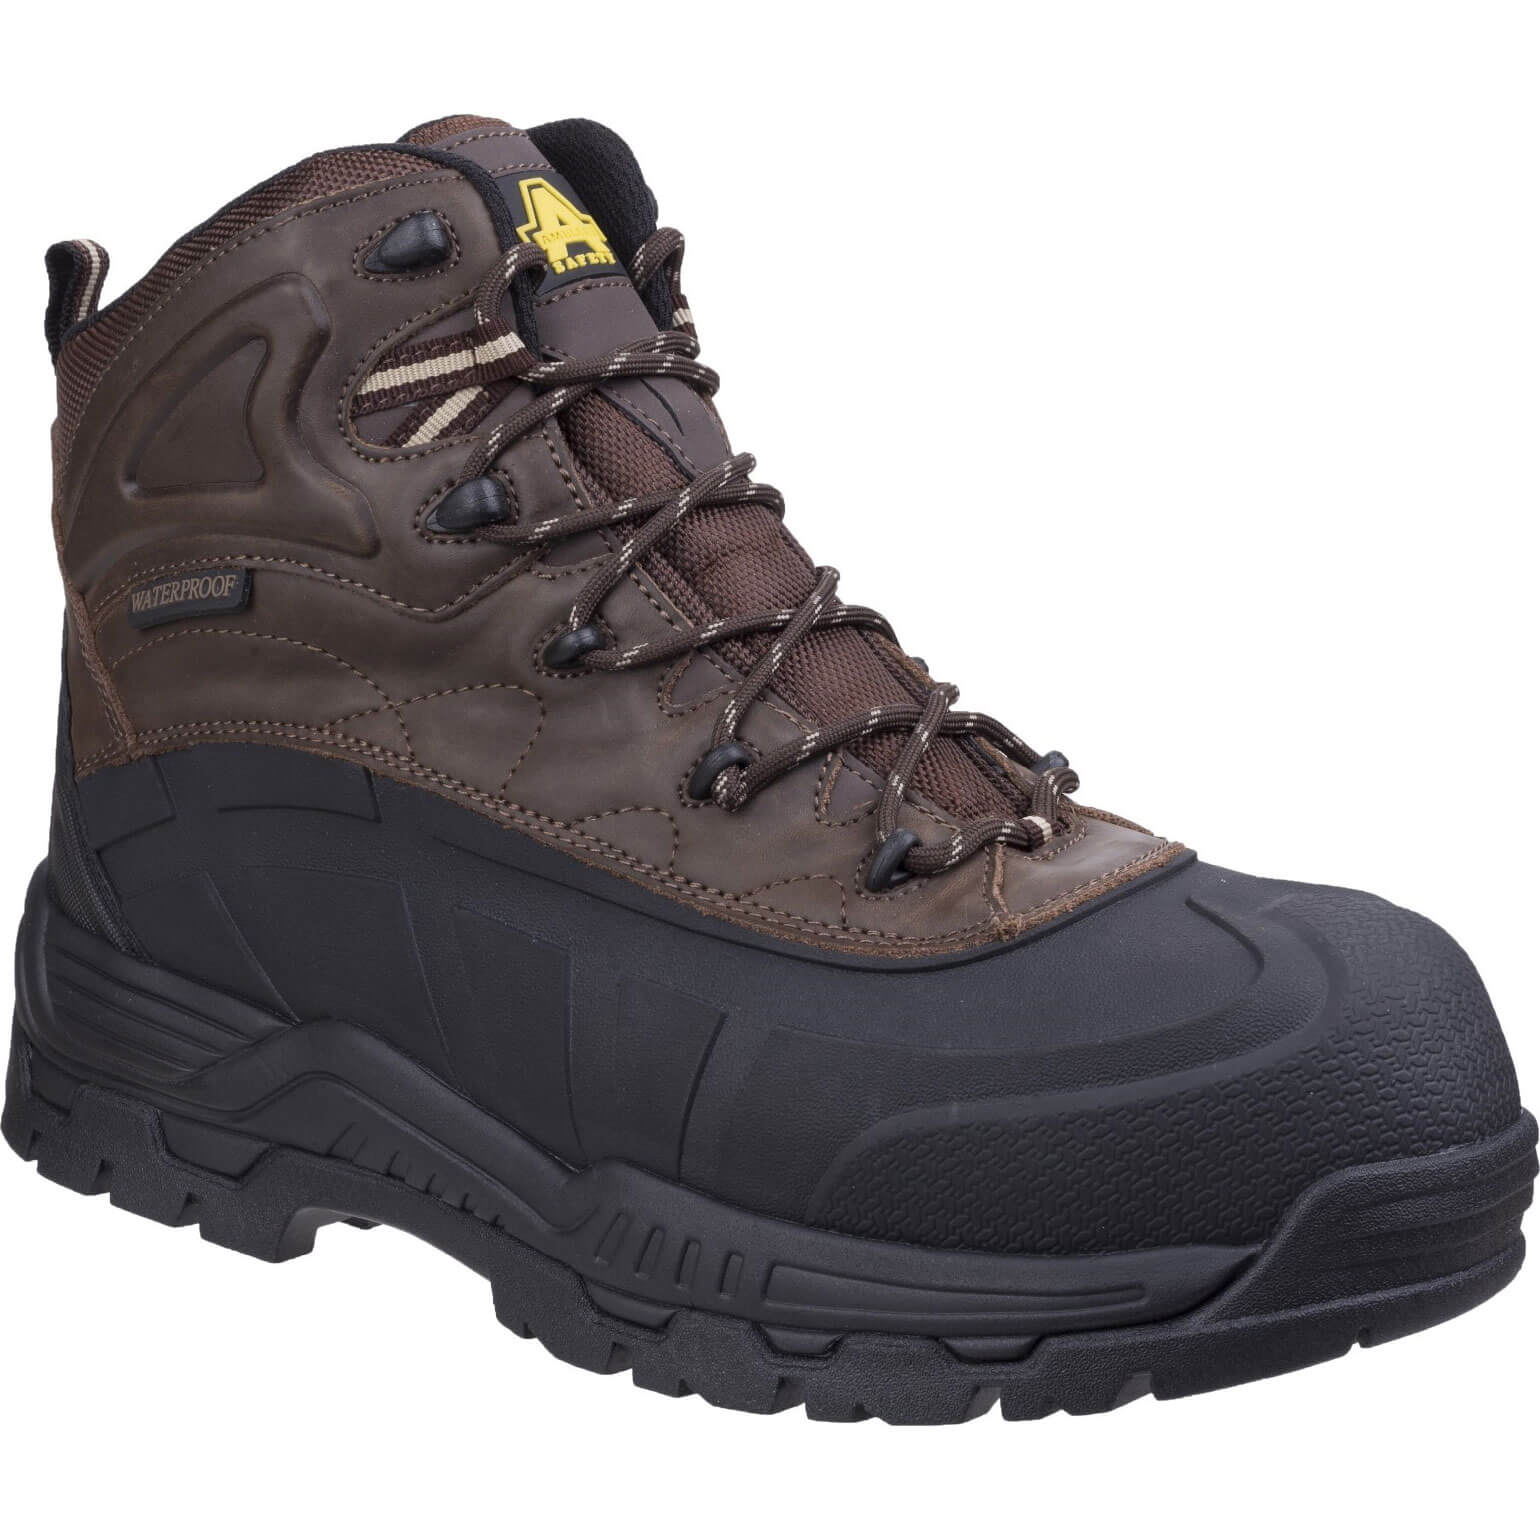 Image of Amblers Safety FS430 Orca Safety Boot Brown Size 10